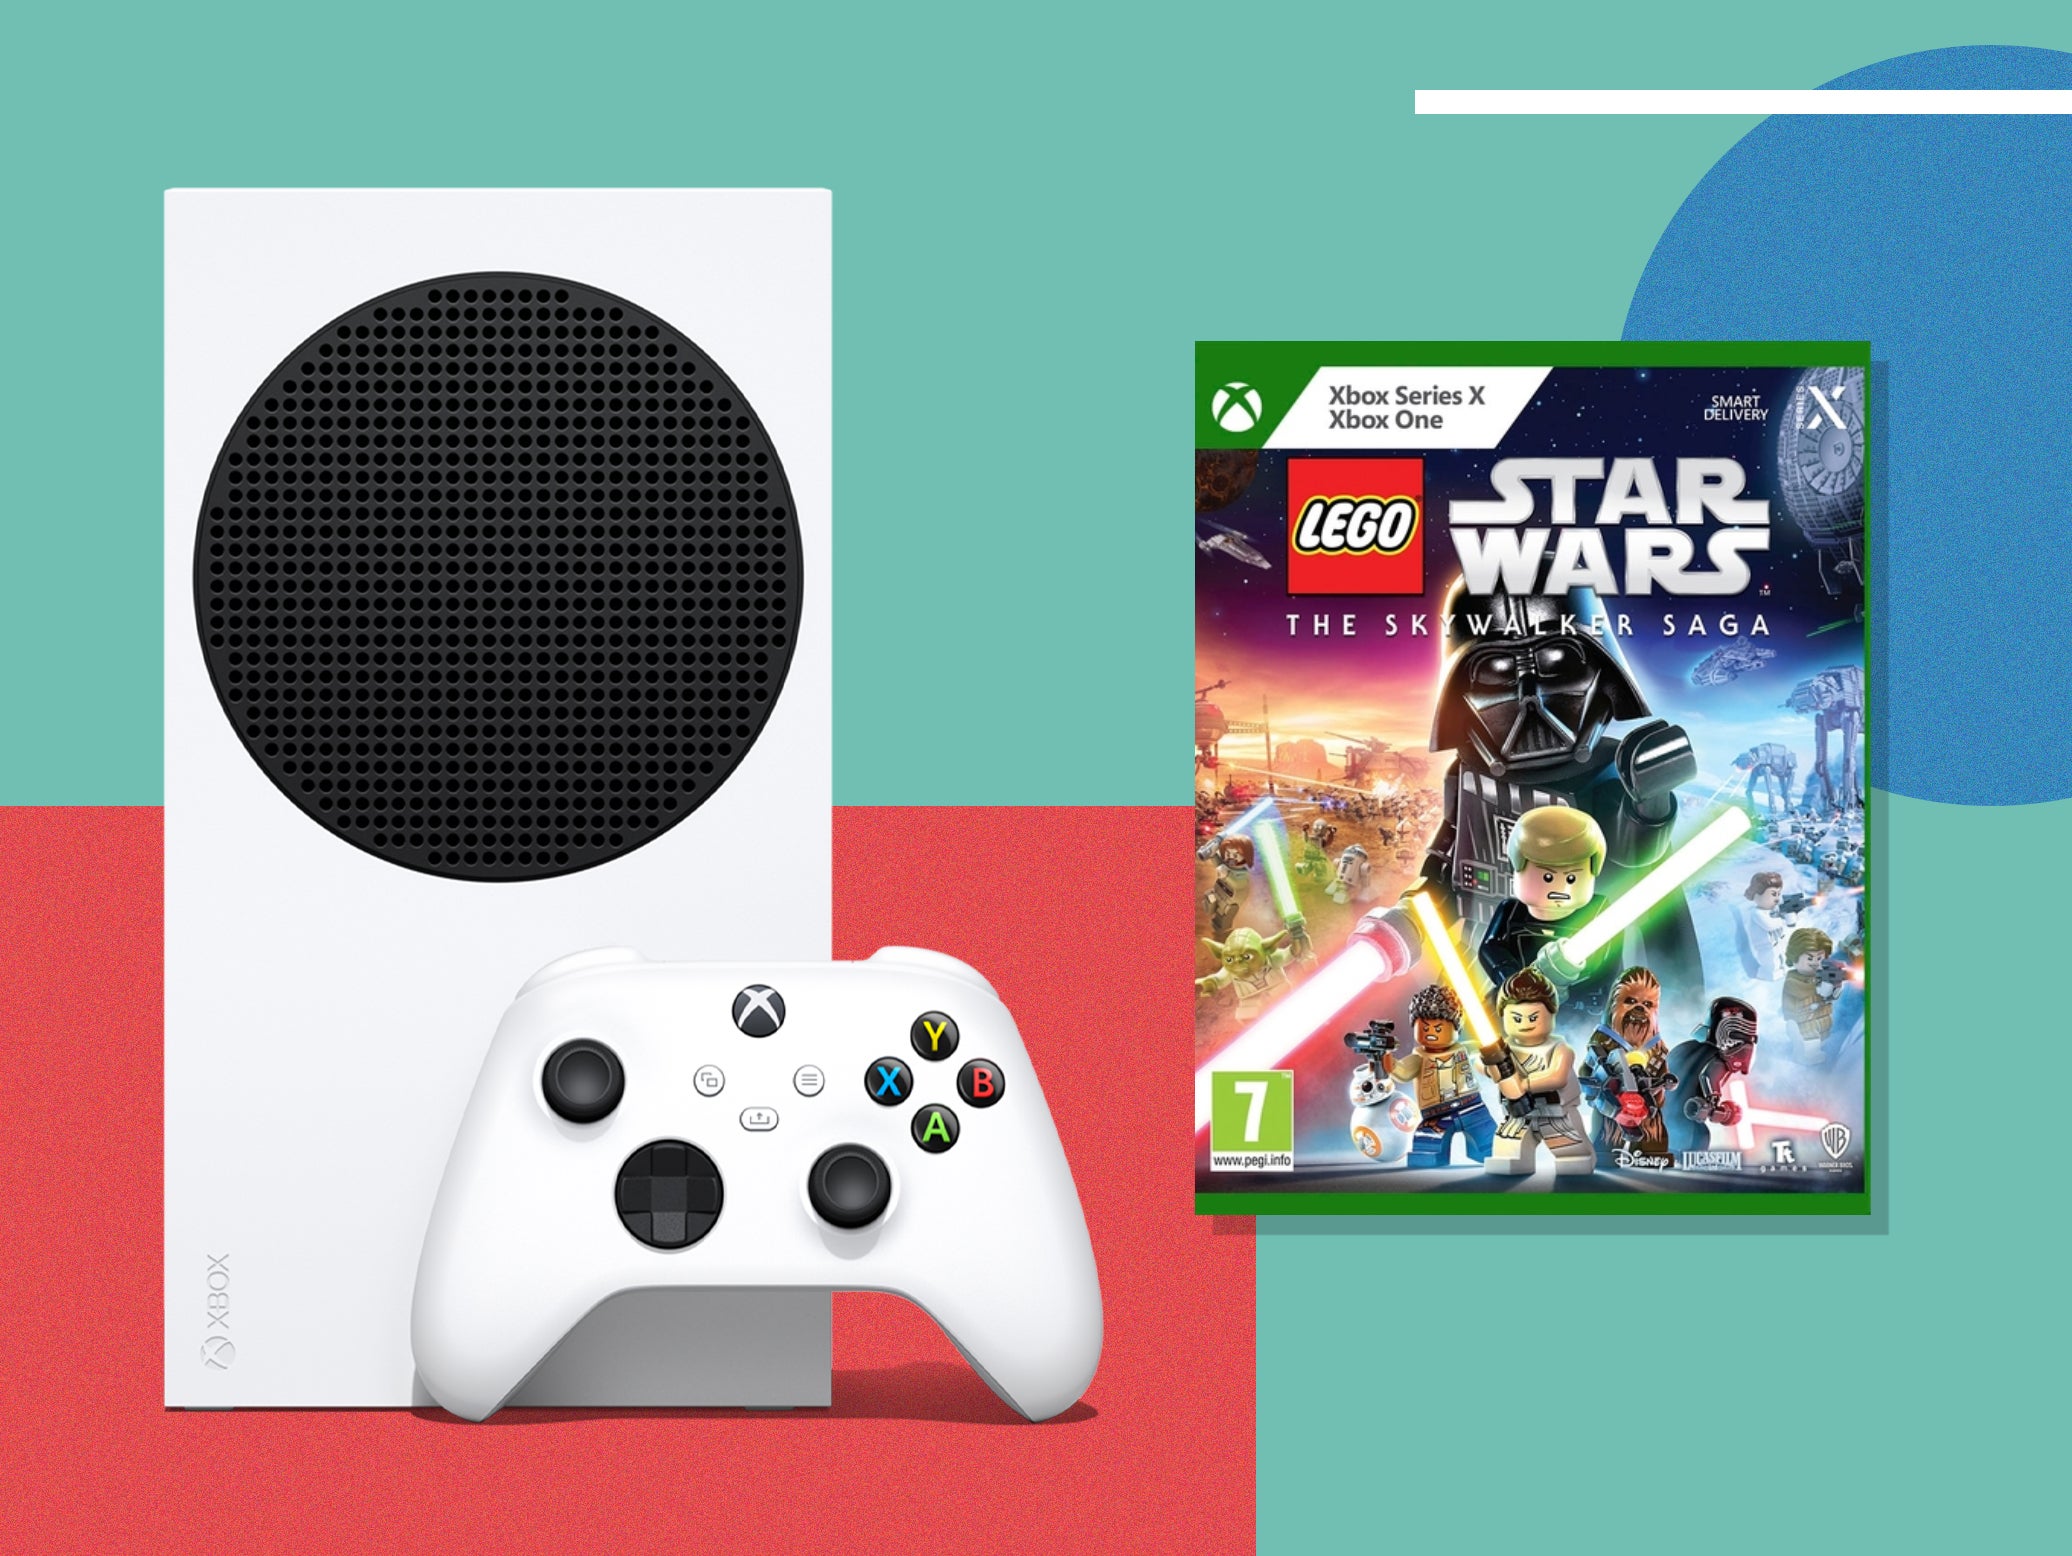 Lego Star Wars' deal: Get the game bundled with an Xbox series S for  £269.99